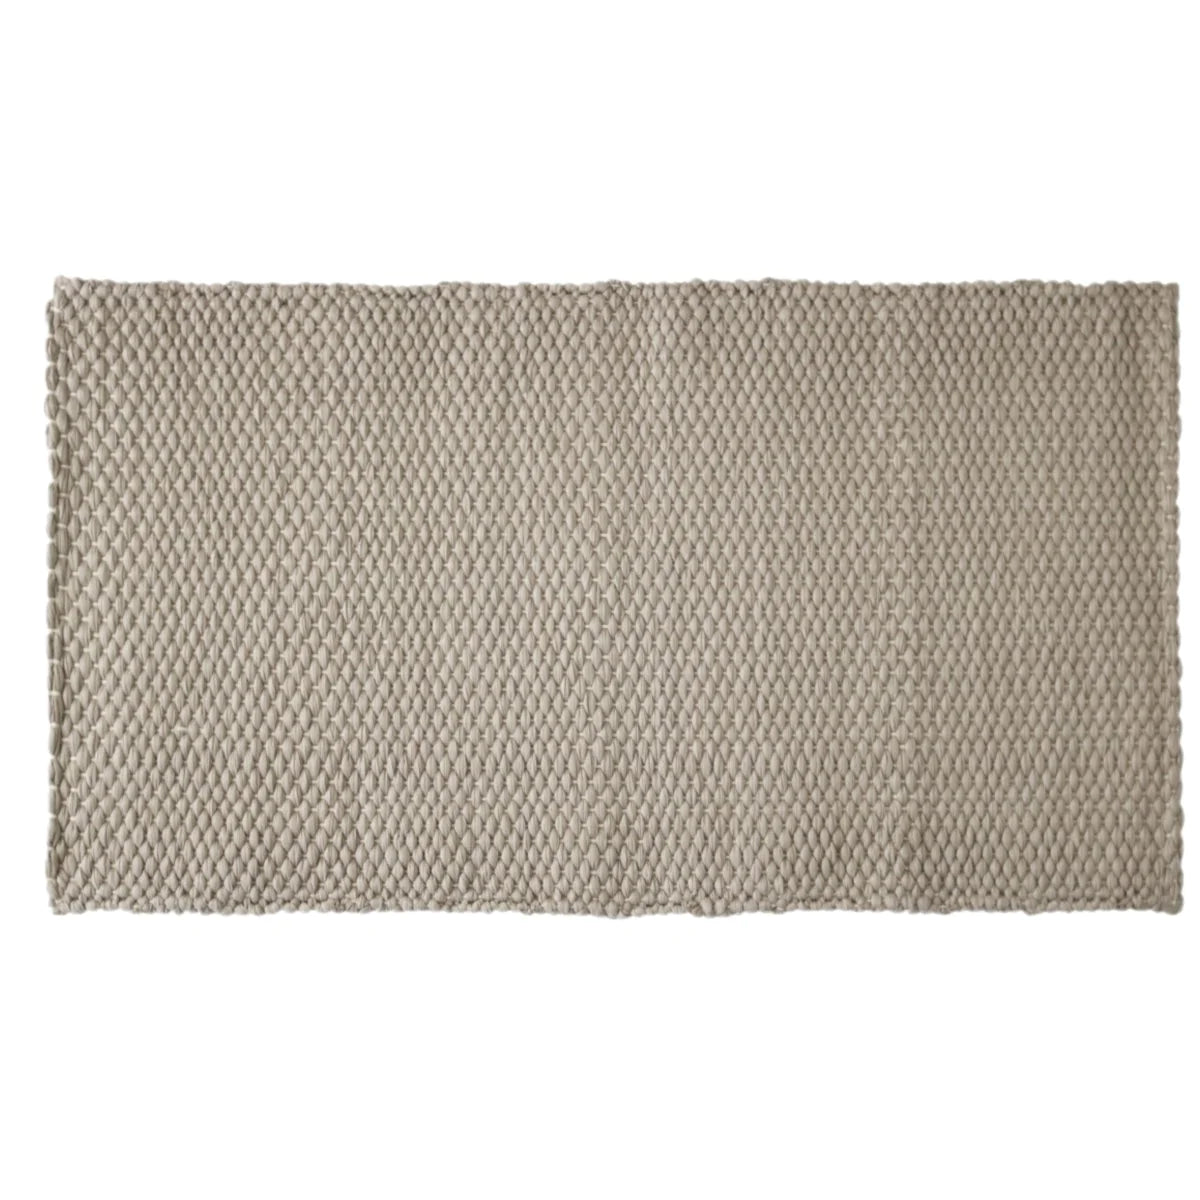 Deocriste Sustainable Rug Handwoven From Upcycled Fibers in Camel